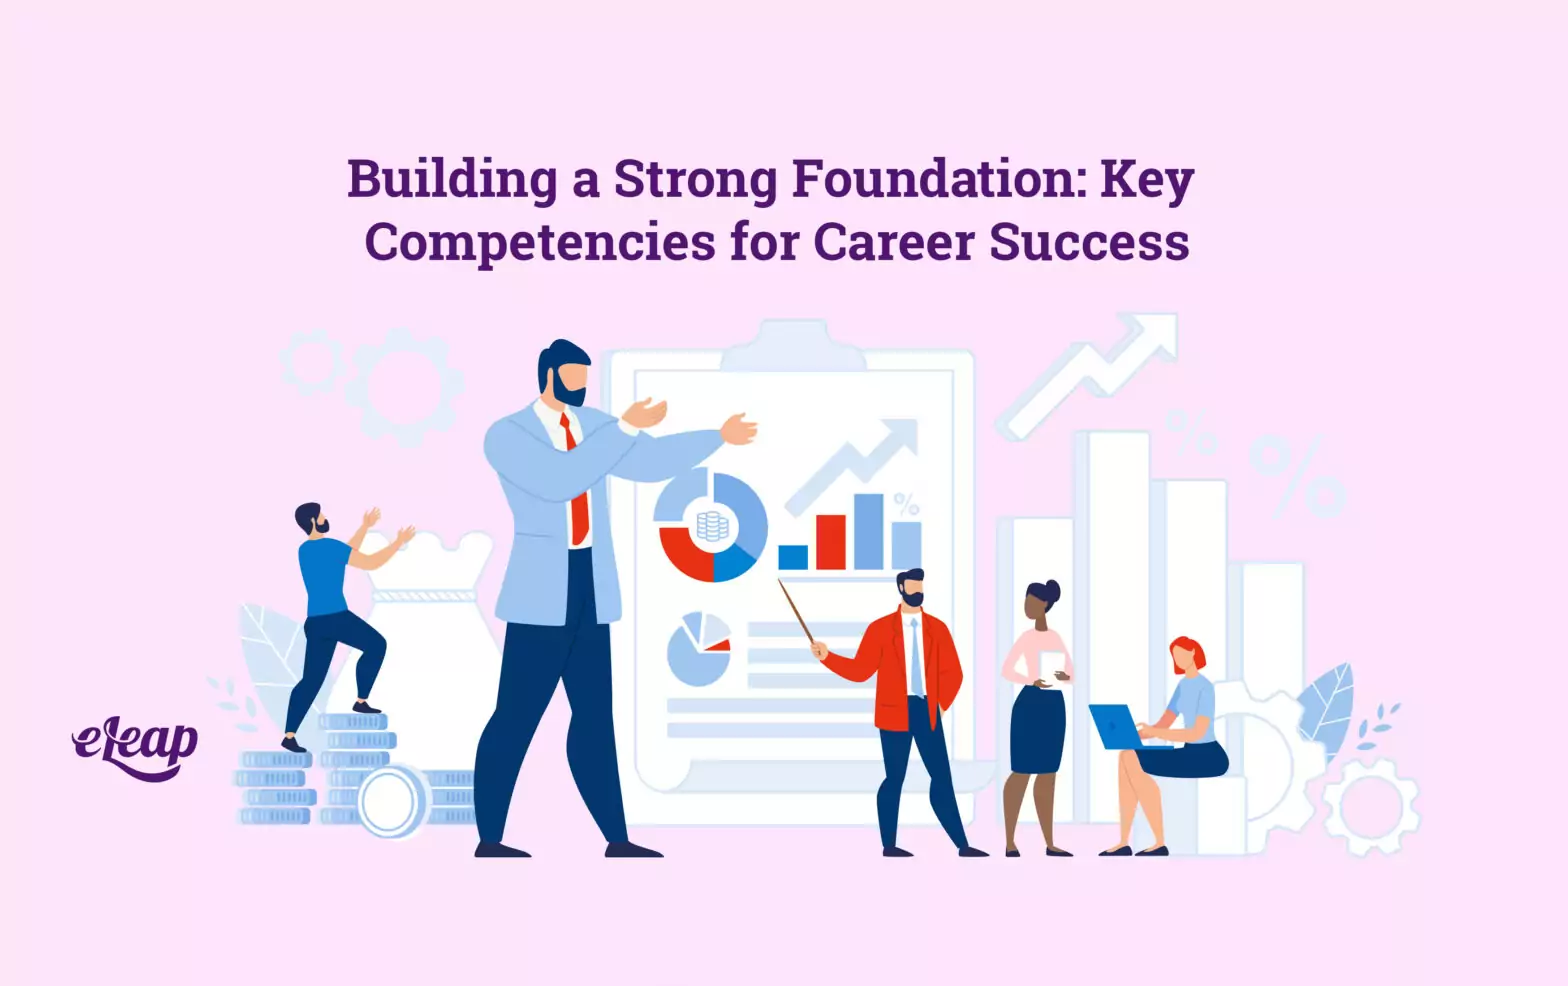 Building a Strong Foundation: Key Competencies for Career Success